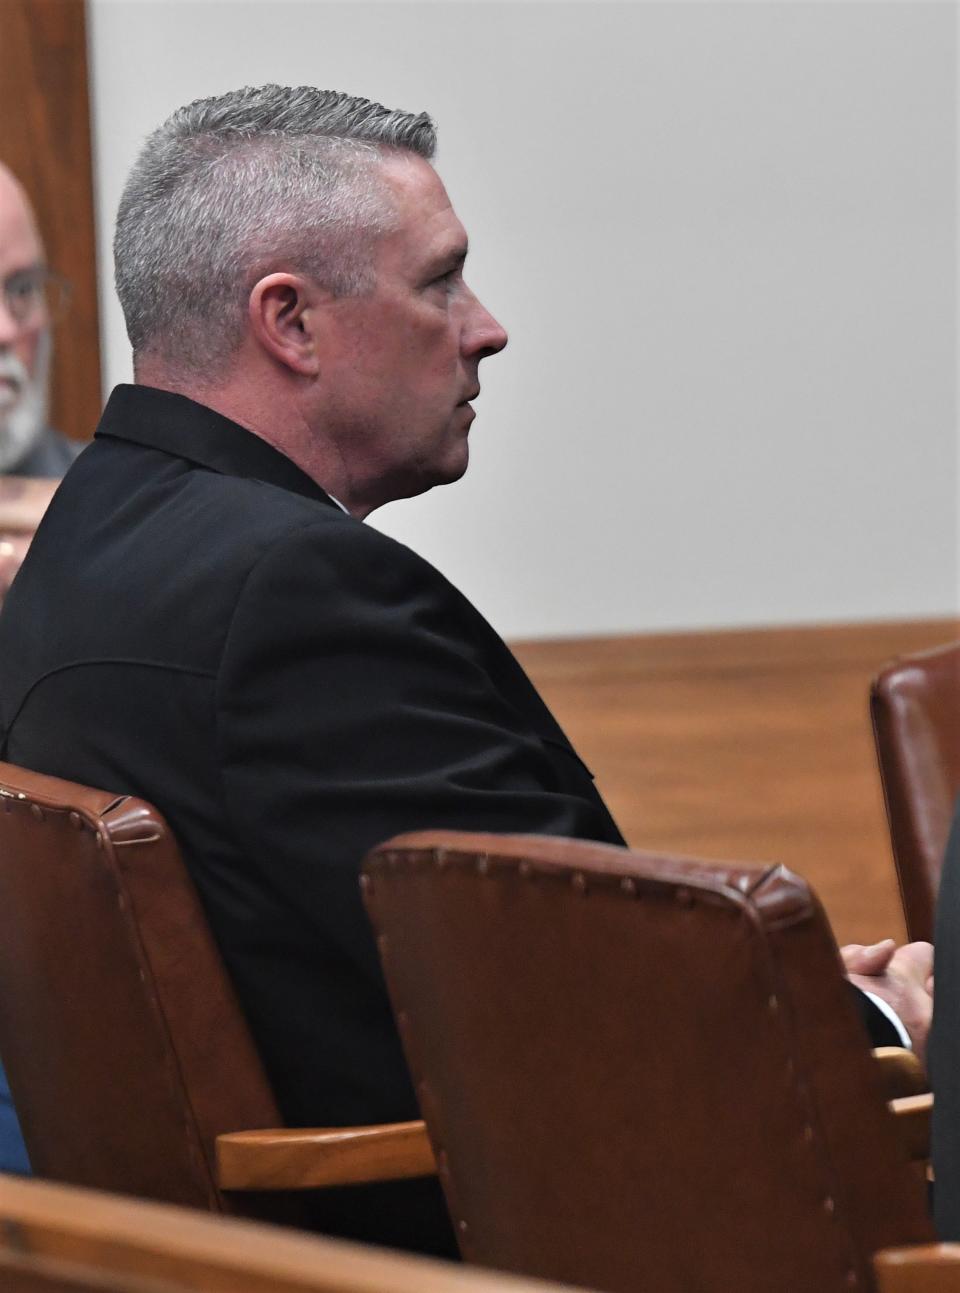 Clay County Sheriff Jeff Lyde sits and waits during proceedings at the courthouse in Henrietta.